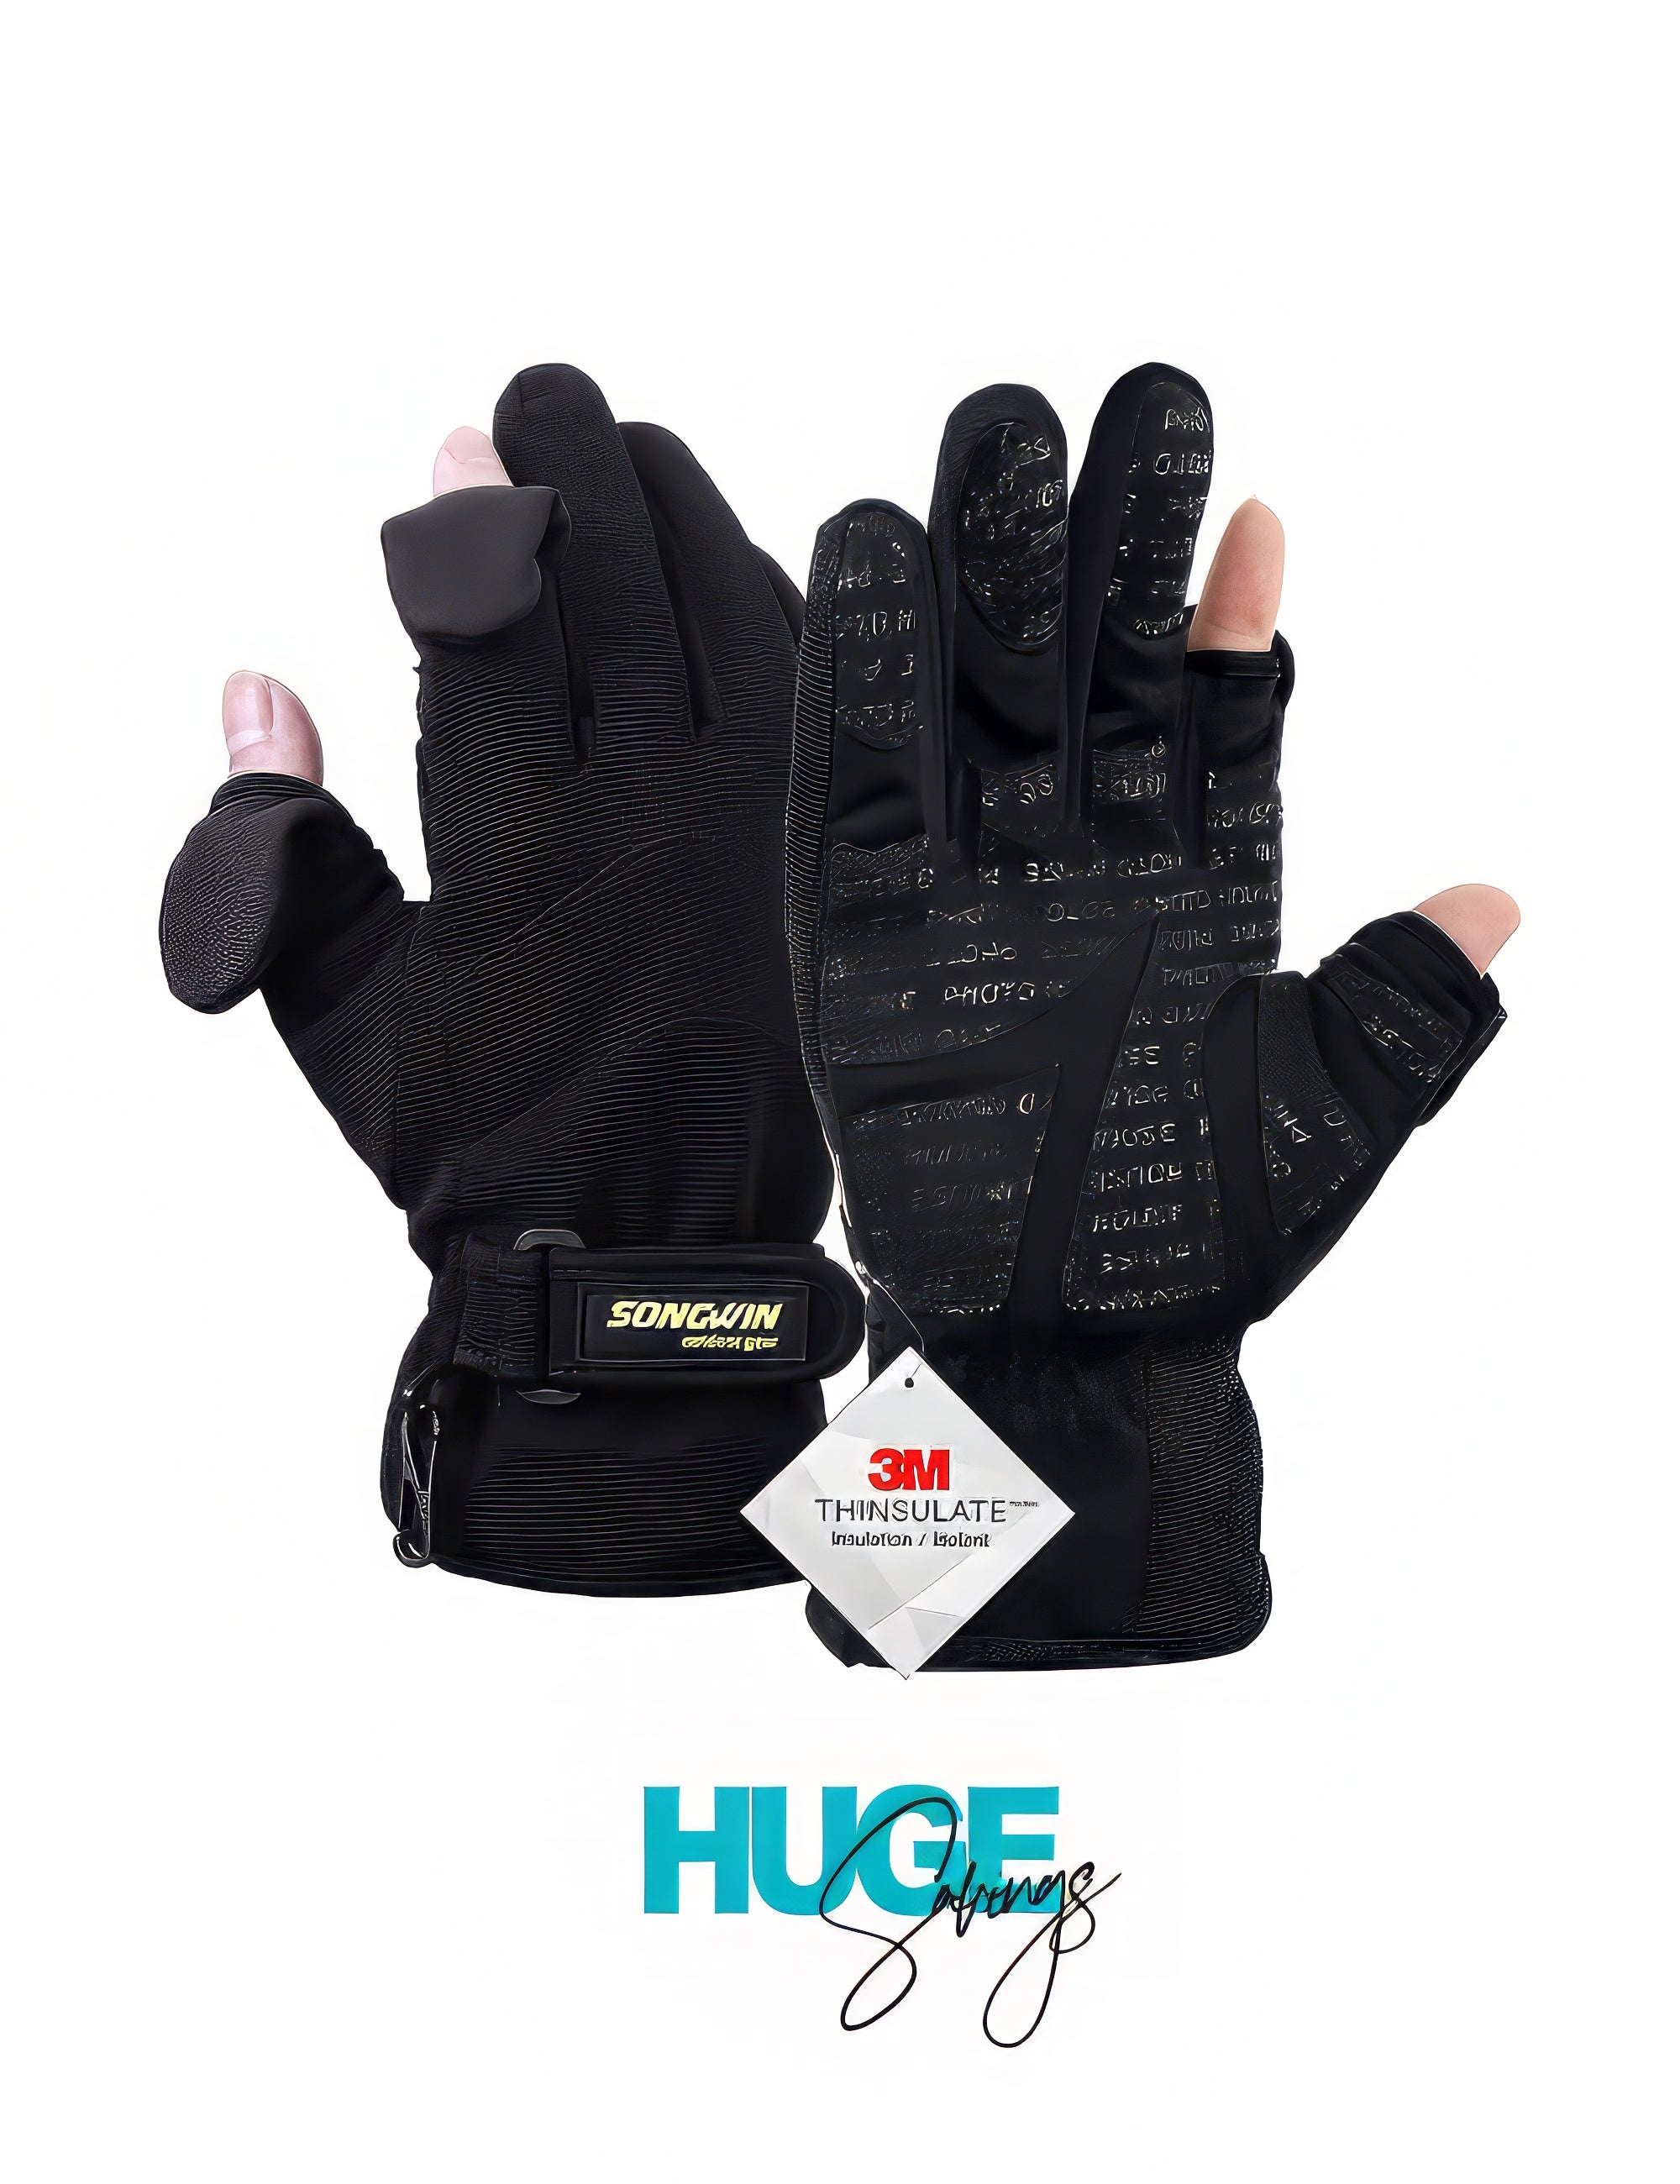 Waterproof Winter Gloves,Ski Gloves For Men And Women,Fishing,Photographing.